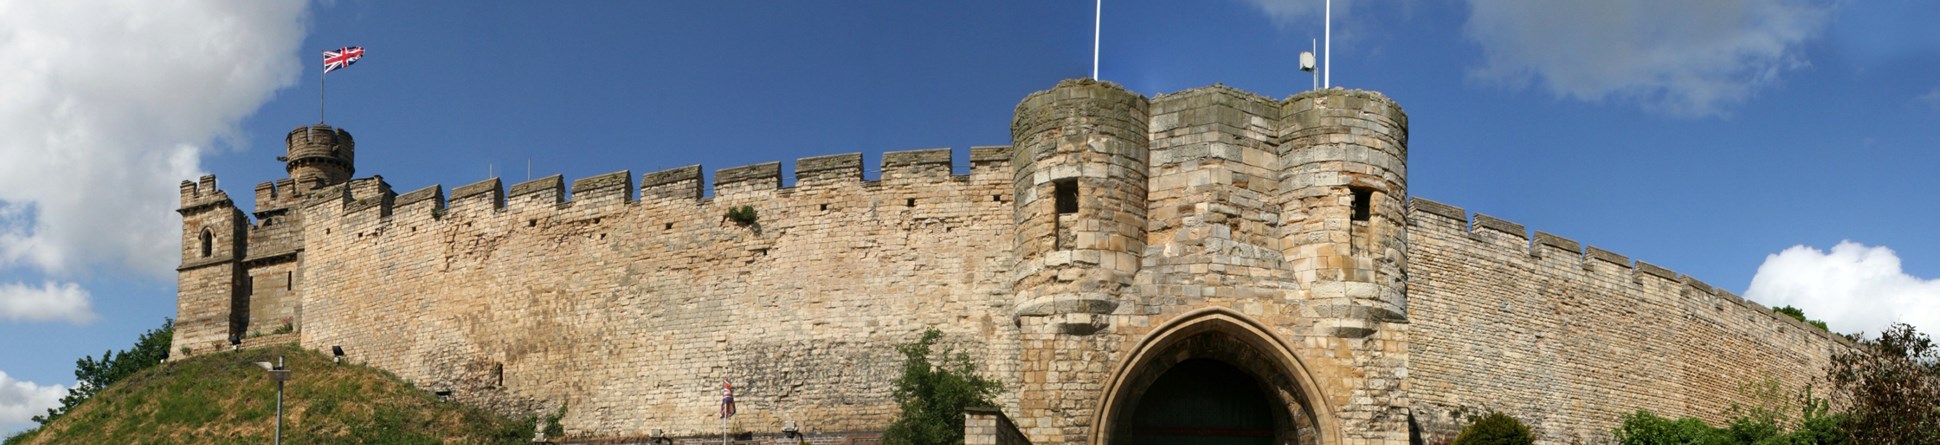 The walls of a large English castle beneath a blue sky with clouds